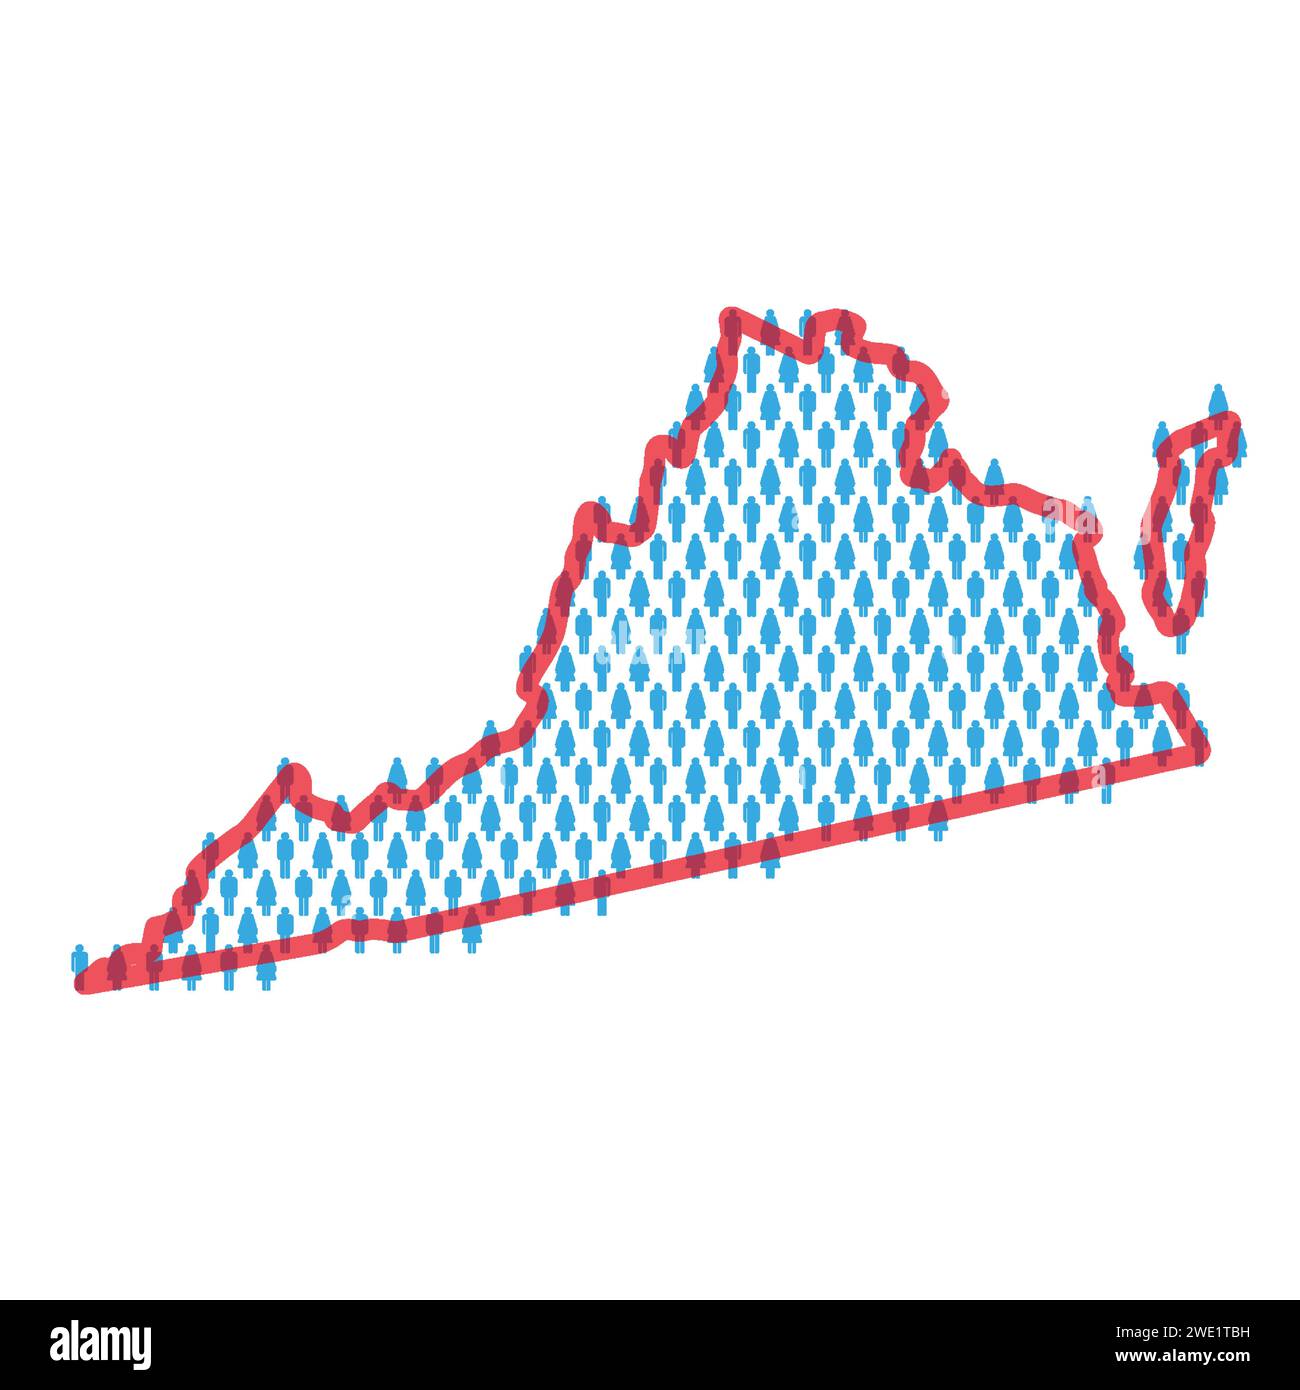 Virginia population map. Stick figures people map with bold red translucent state border. Pattern of men and women icons. Isolated vector illustration Stock Vector